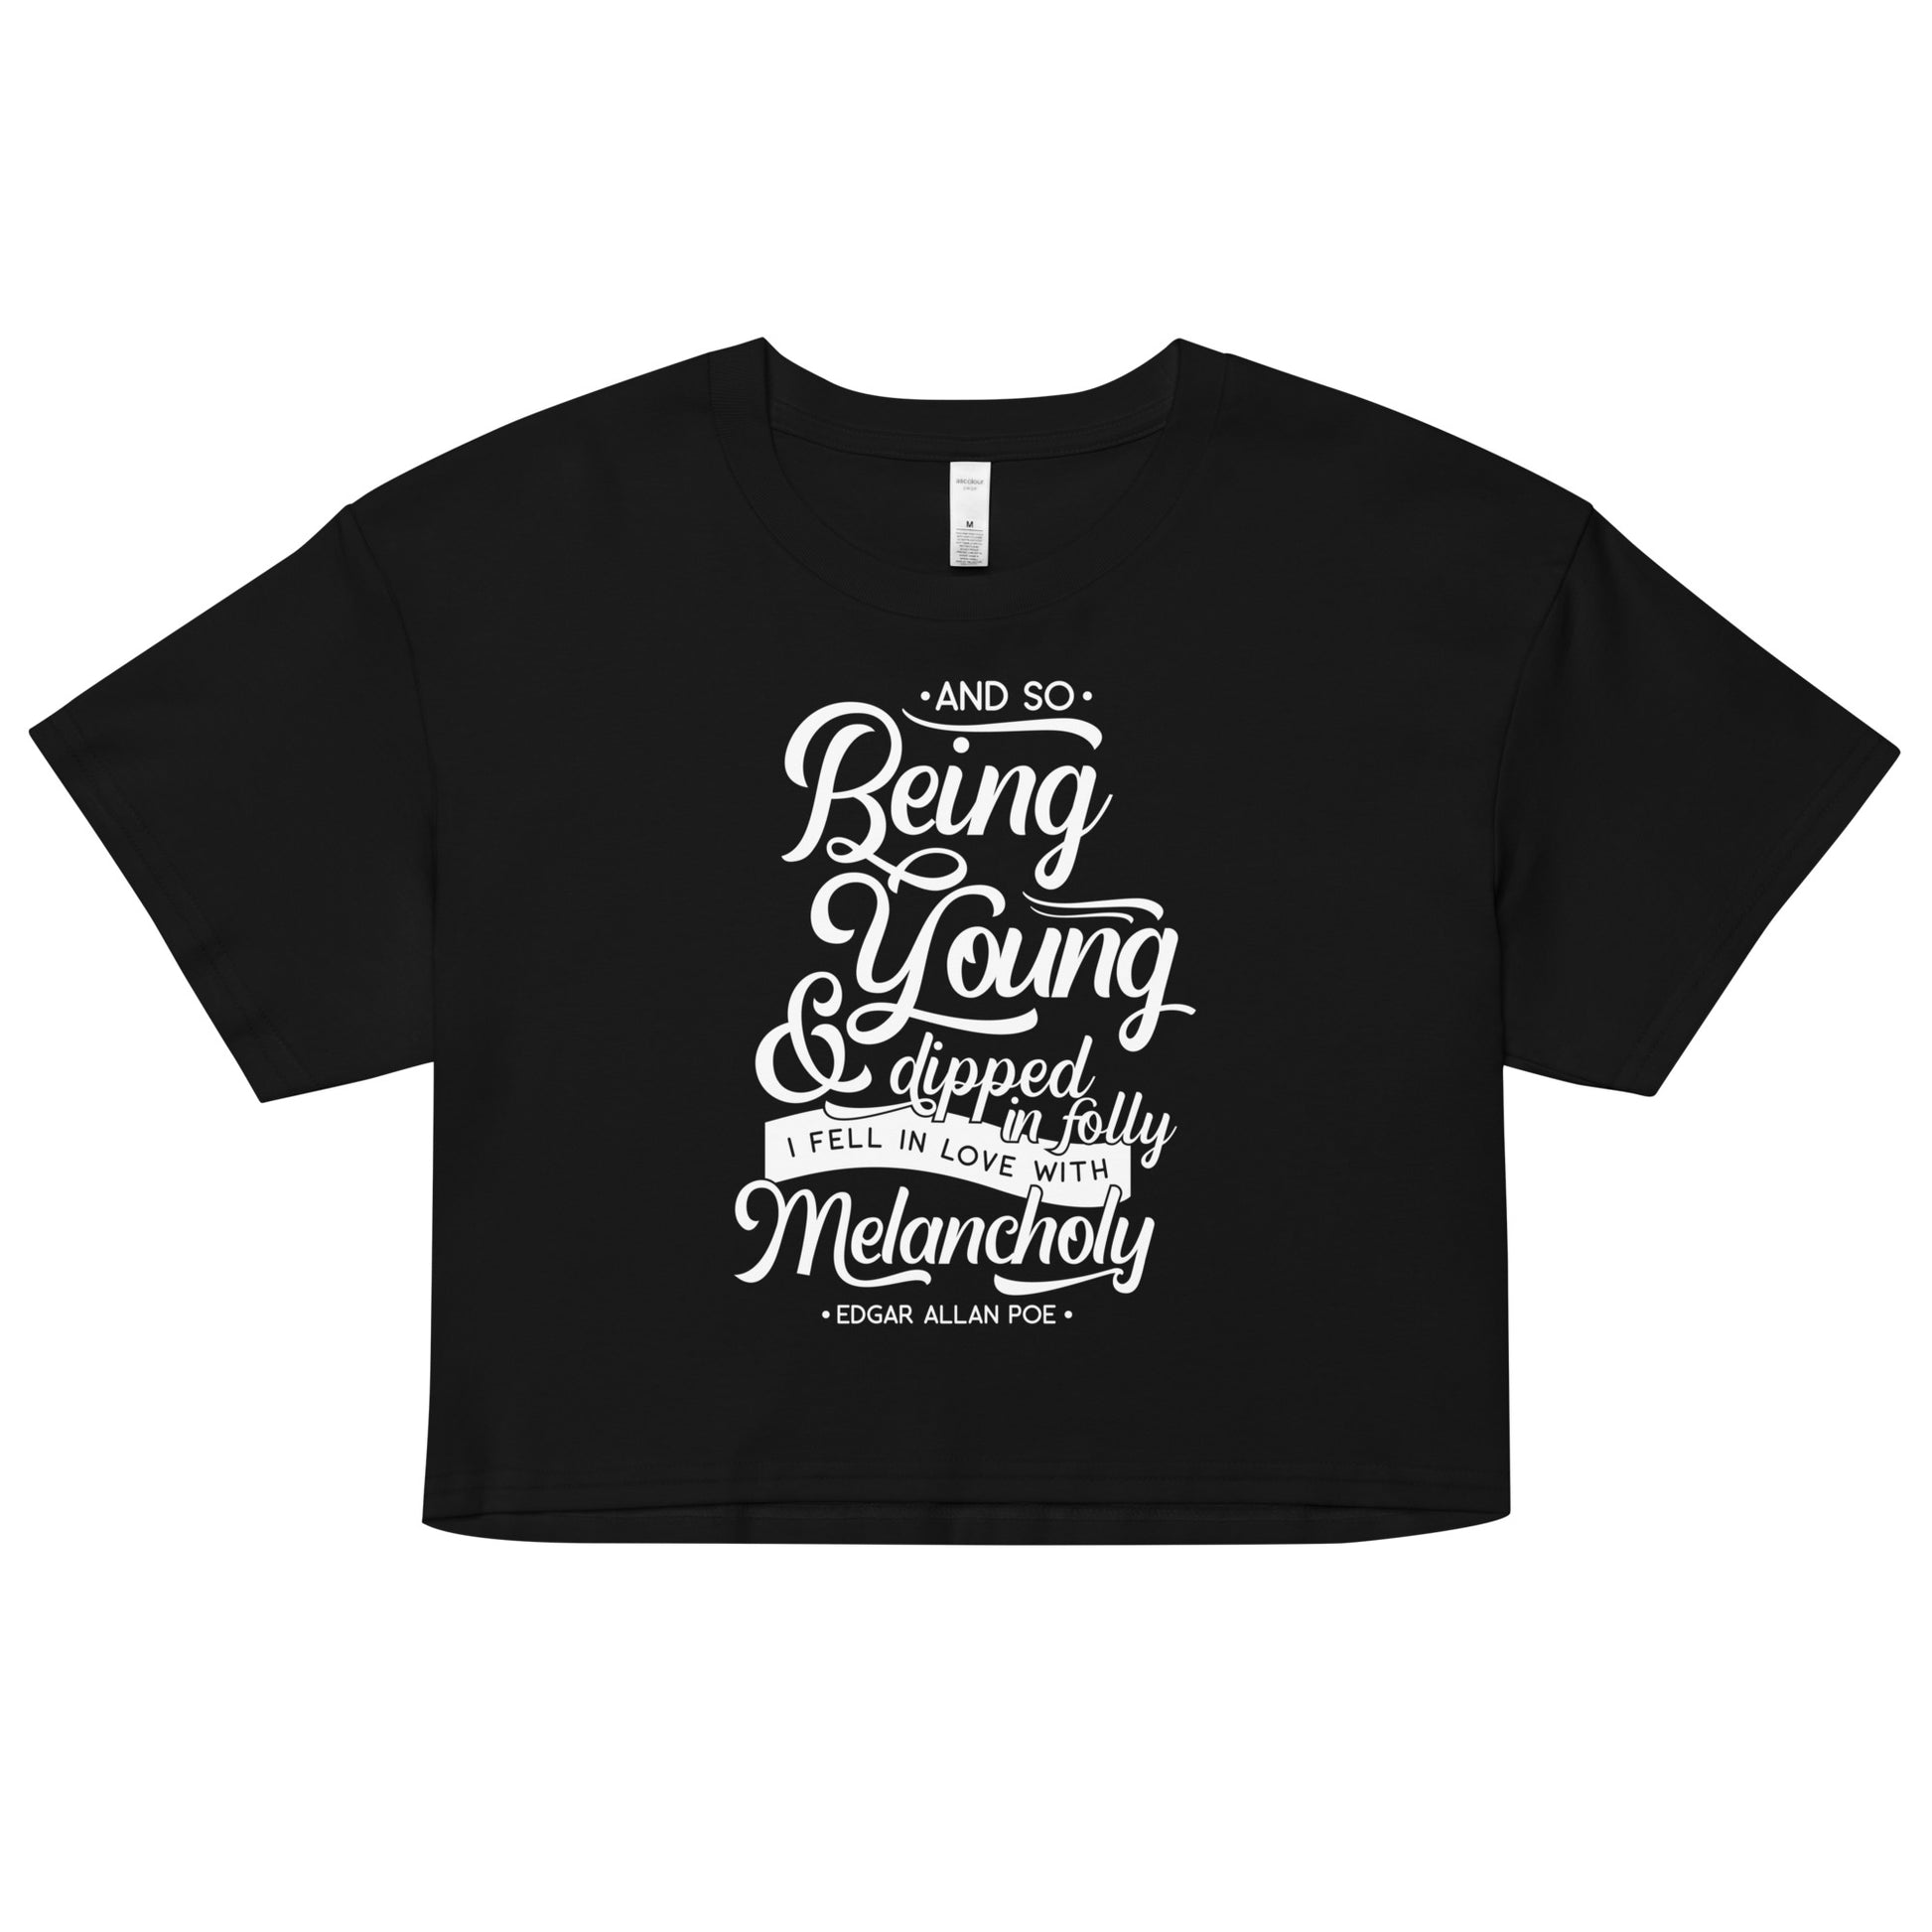 Fell in Love with Melancholy Edgar Allan Poe Quote - Women’s crop top - Black Front